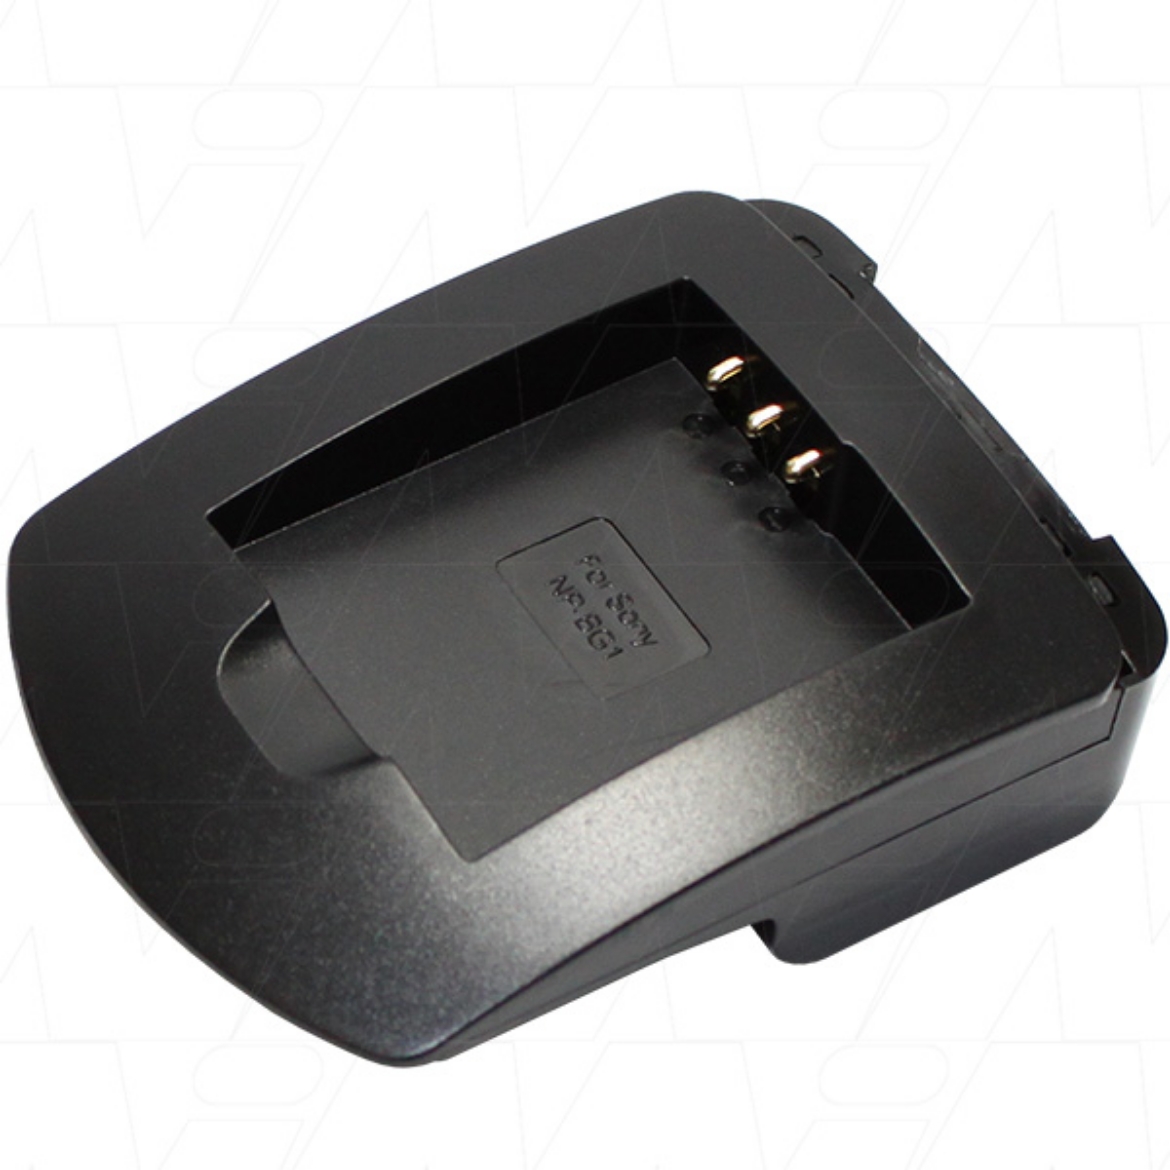 Picture of DCC1 CHARGER ADAPTOR PLATE FOR SONY NP-BG1, NP-FG1, MASTER DCB-NP-BG1 BATTERIES